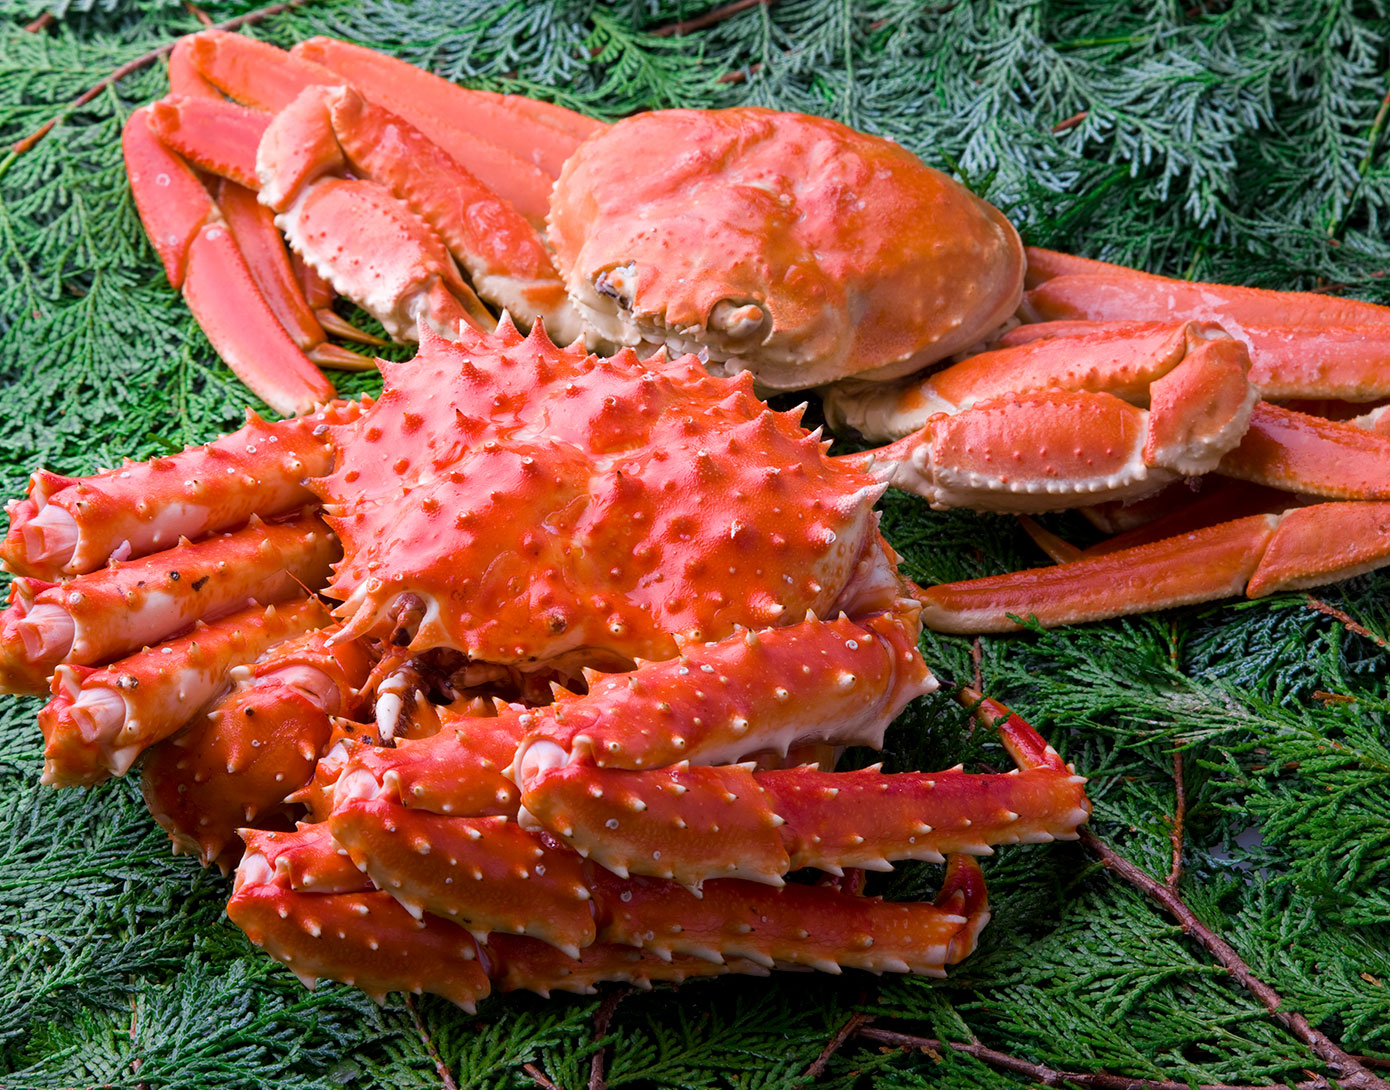 Snow Crab Market Price 2022 How do you Price a Switches?